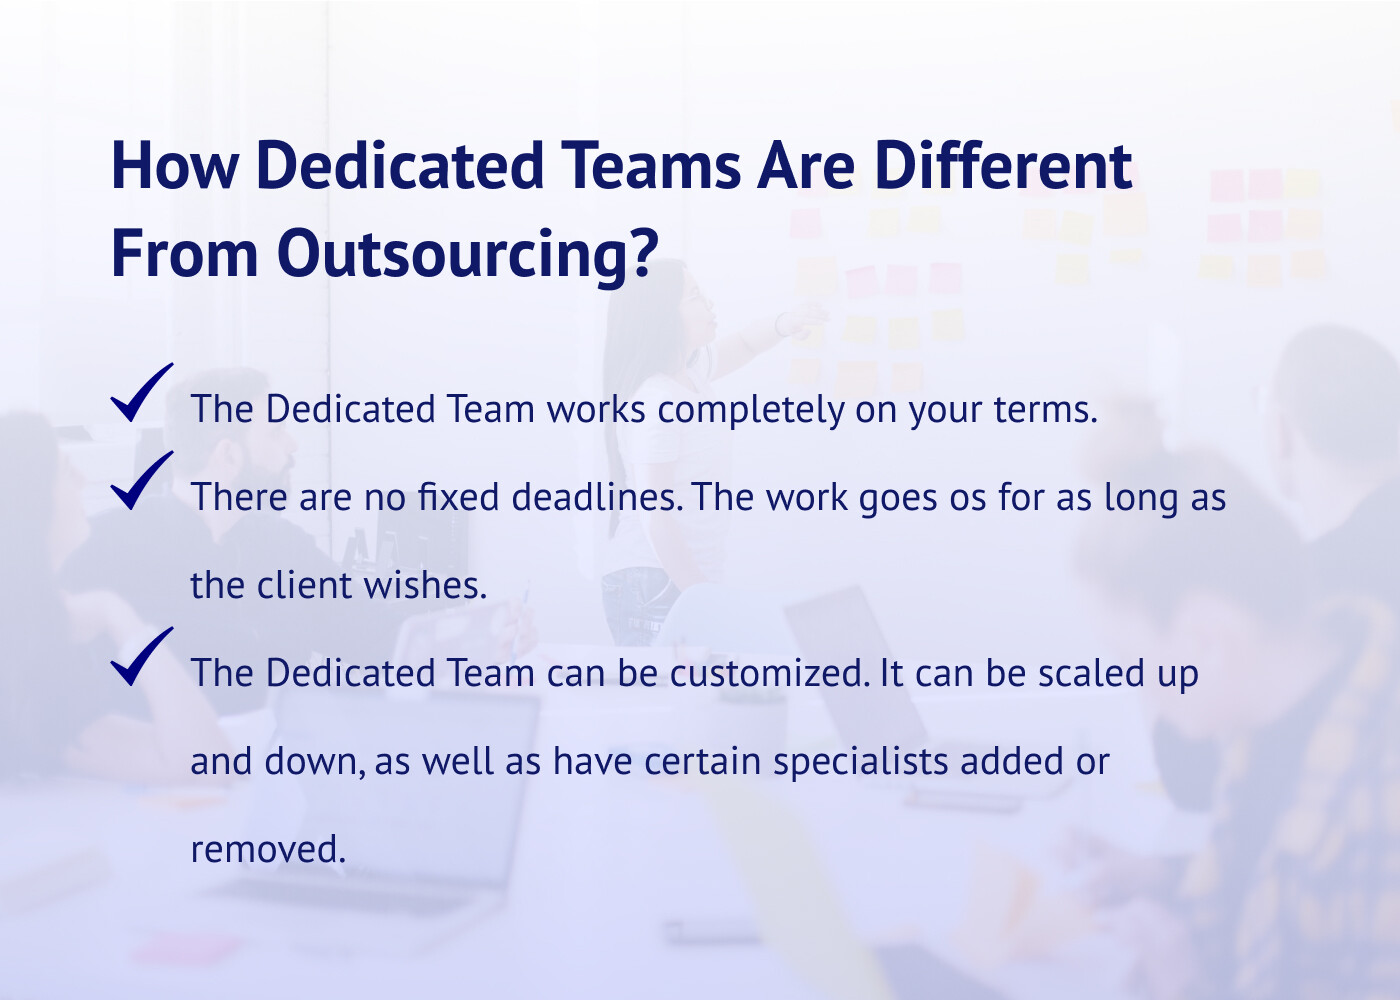 How the Dedicated Team Differs from general outsourcing